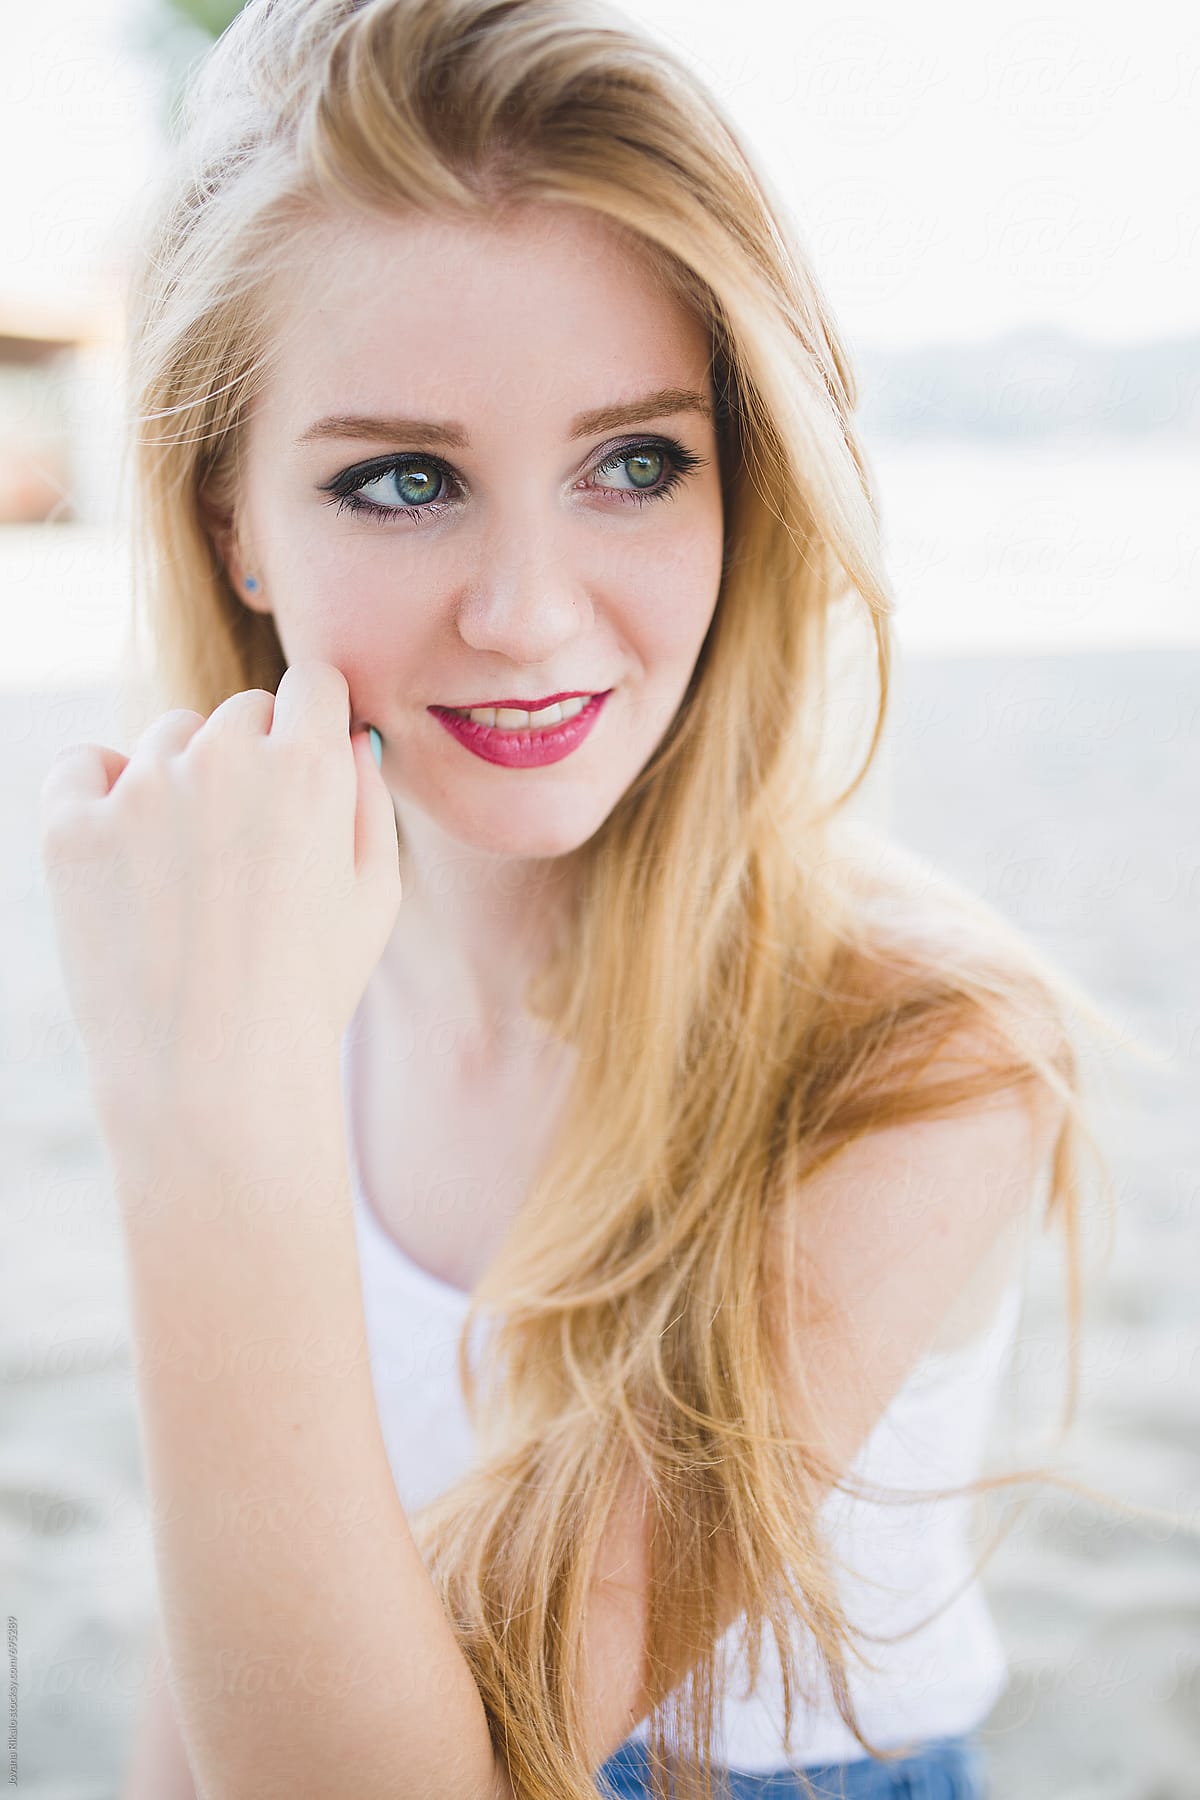 Portrait Of A Beautiful Young Woman Smiling By Stocksy Contributor 